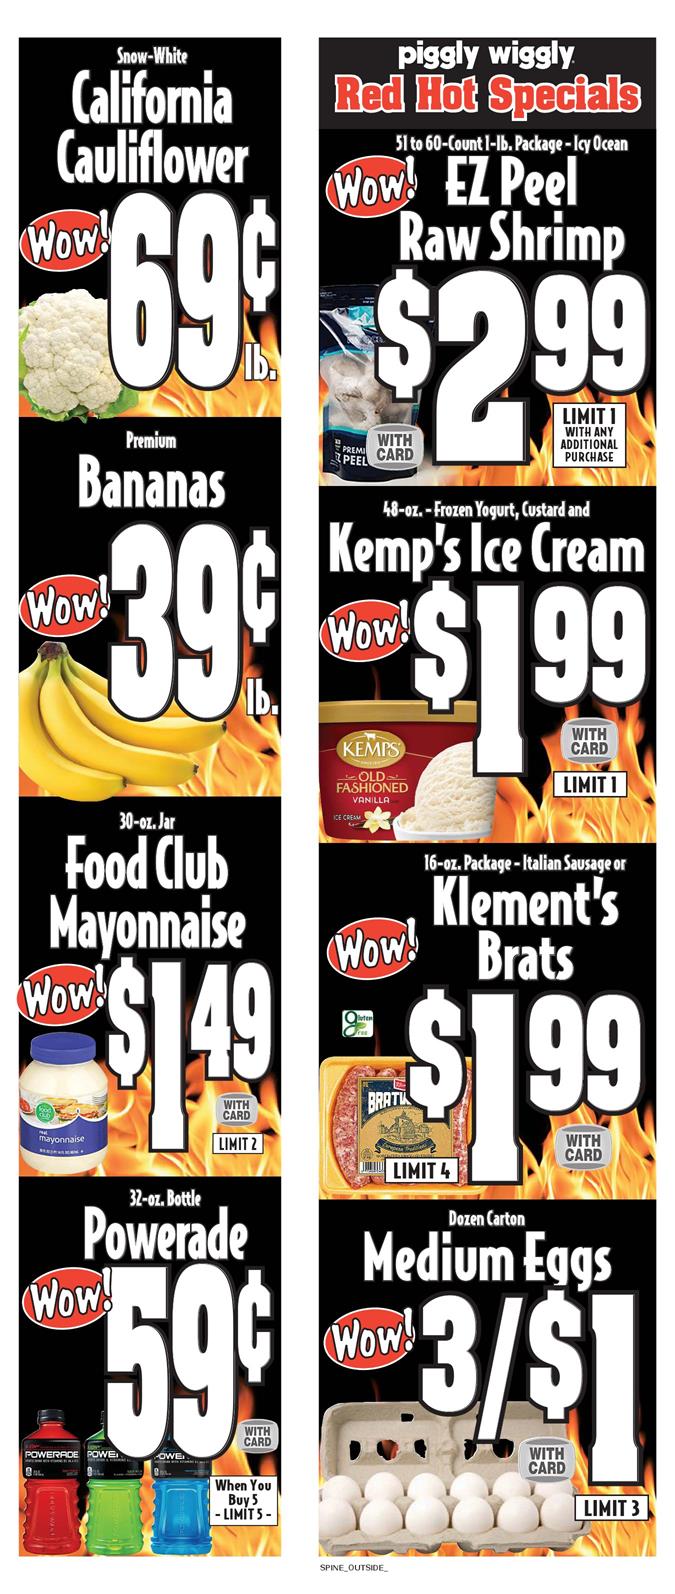 piggly wiggly nashville nc weekly ad